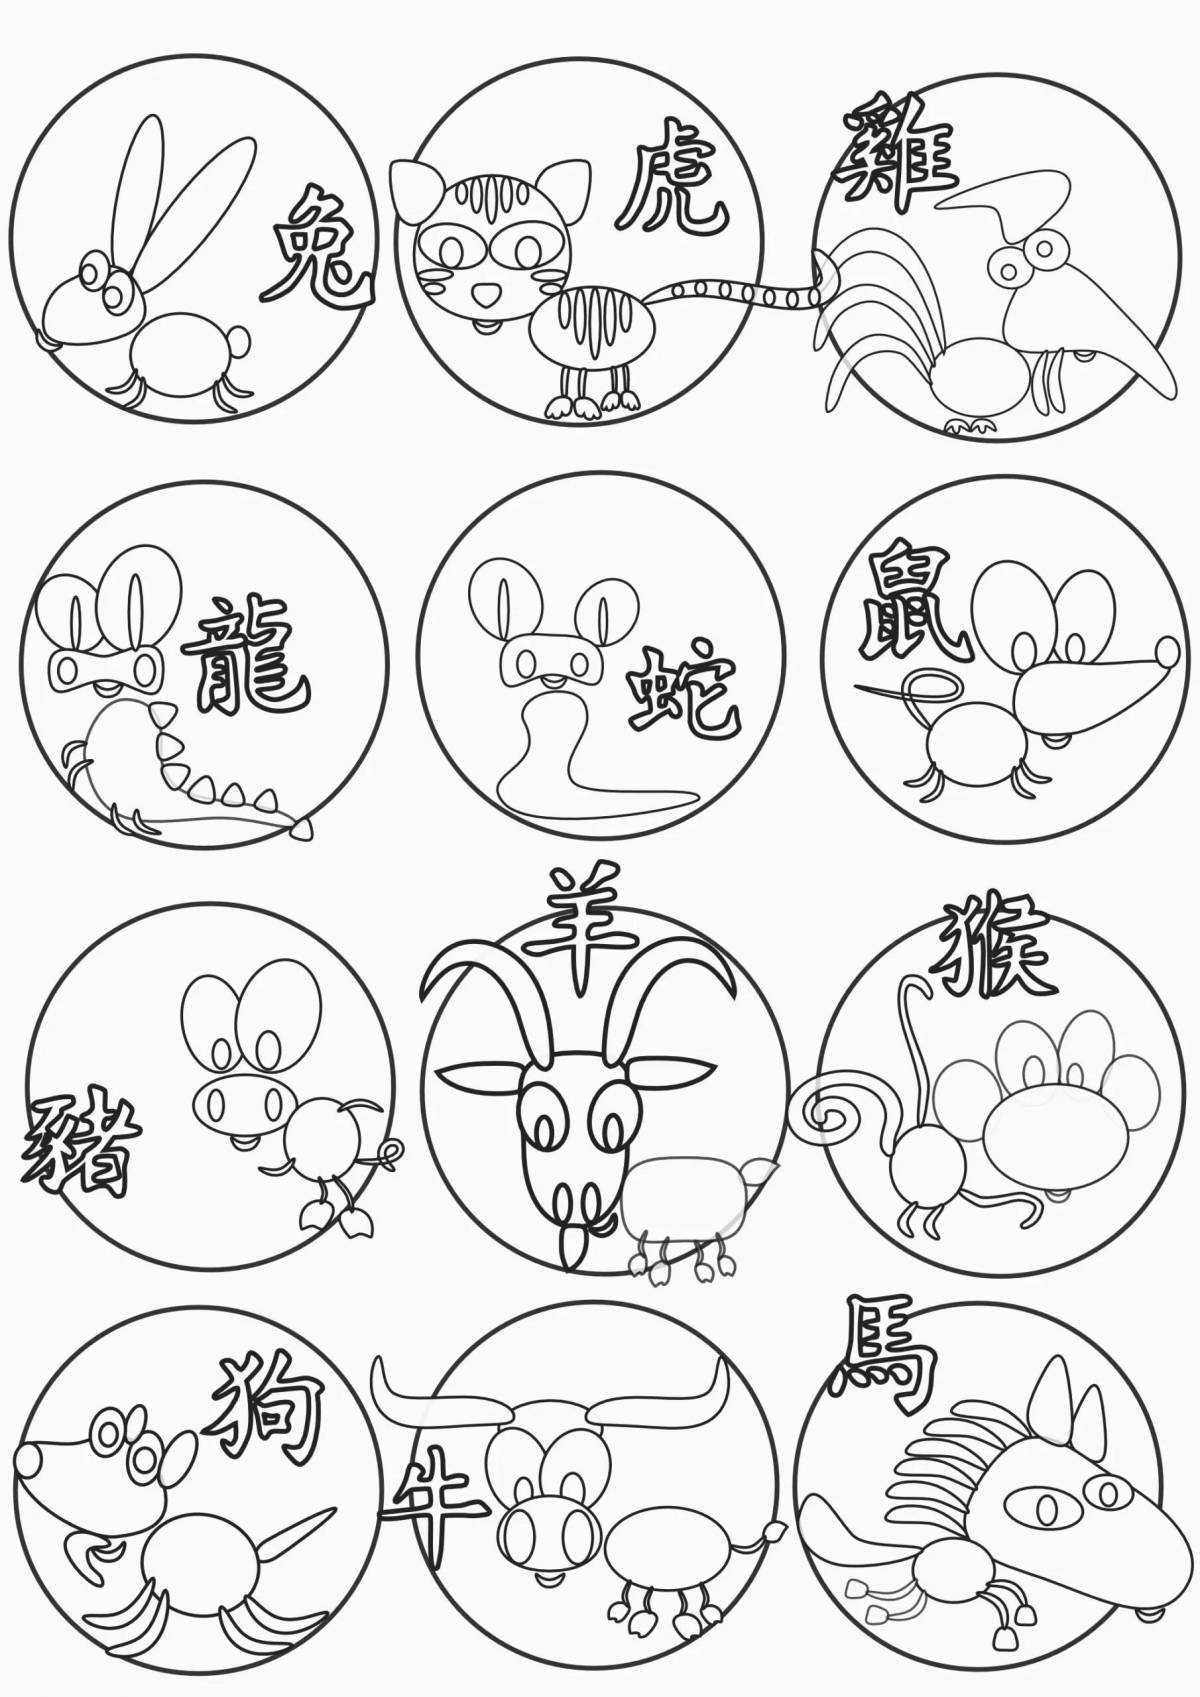 Gorgeous Chinese calendar coloring book